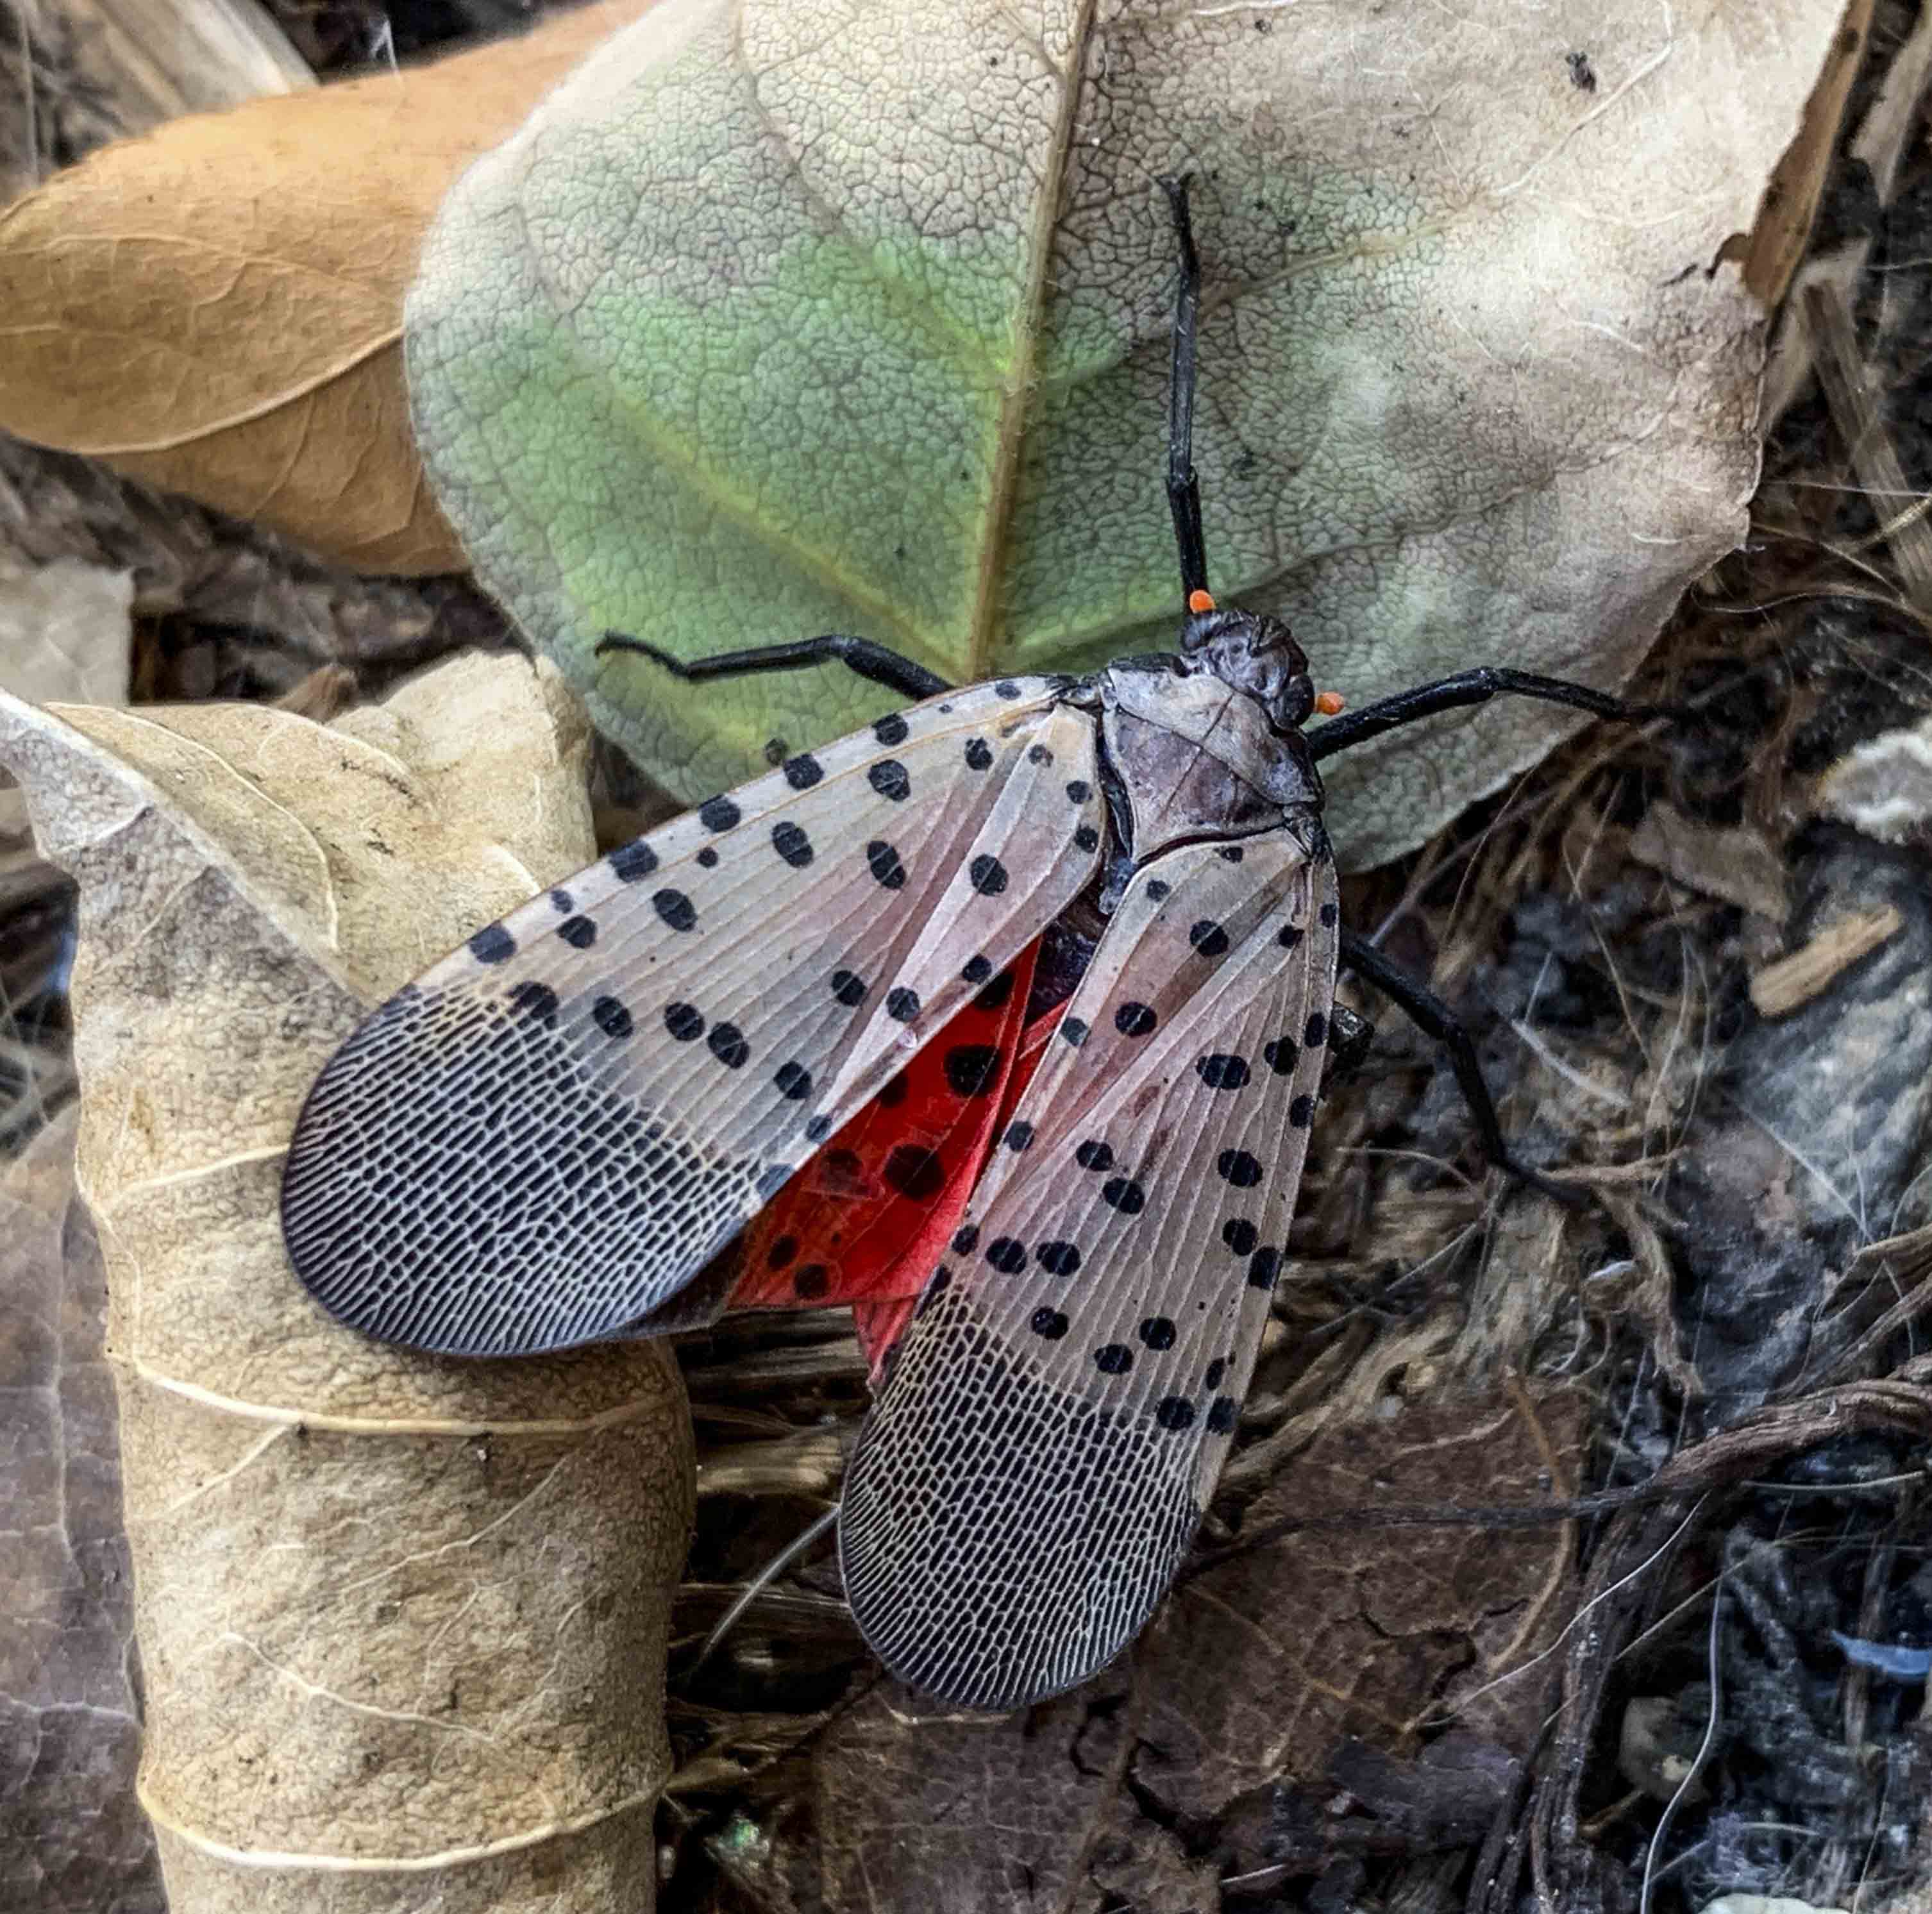 Spotted lanternfly (2), journal of wild culture, ©051620